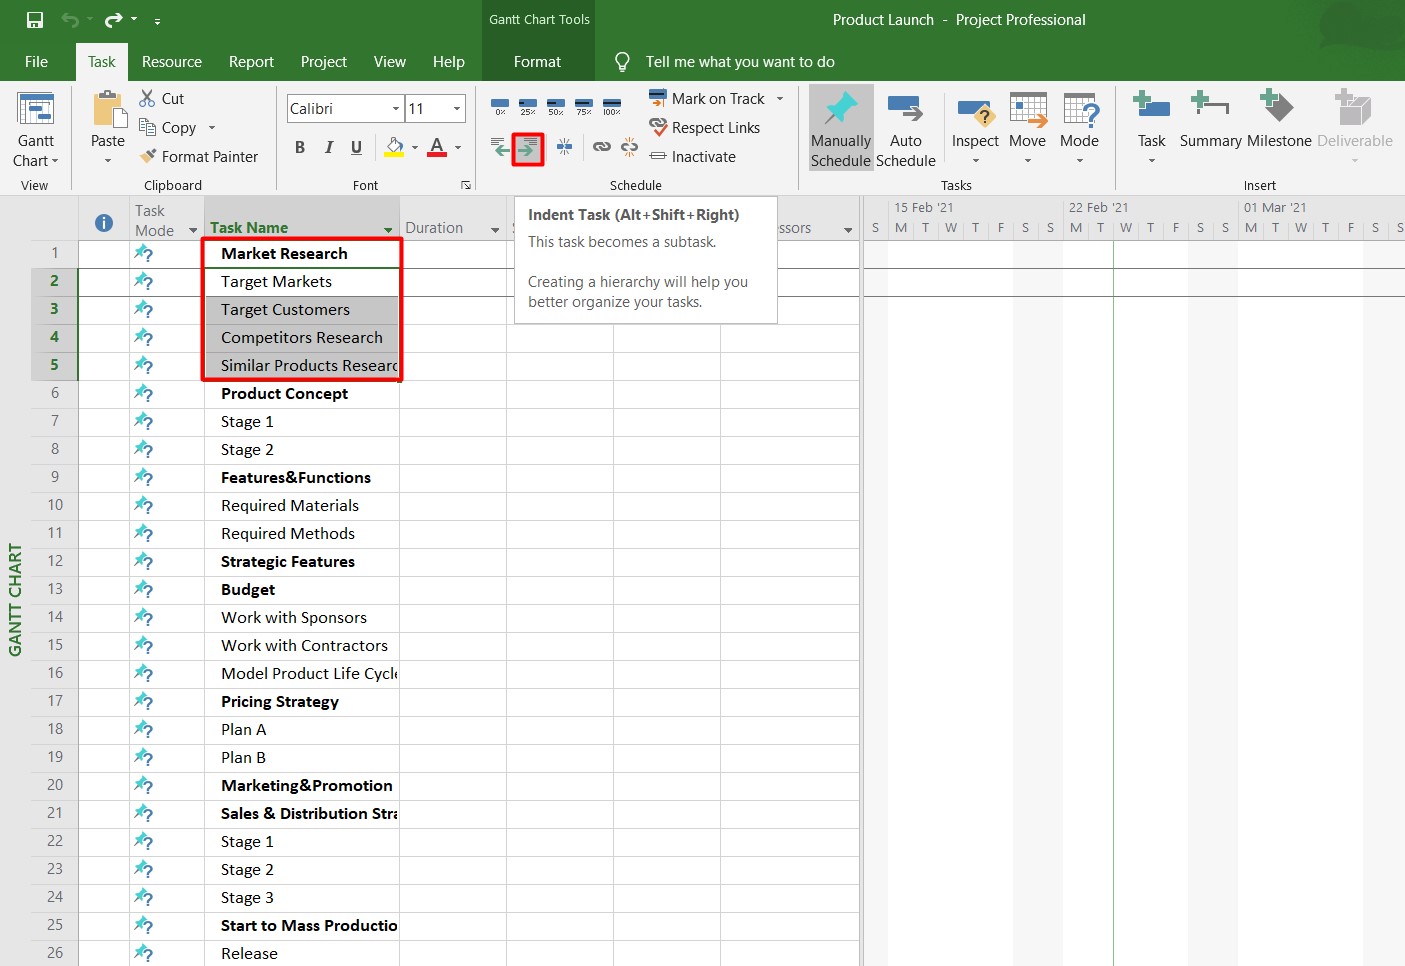 How to create a Gantt chart in MS Project: subtasks on a Gantt chart